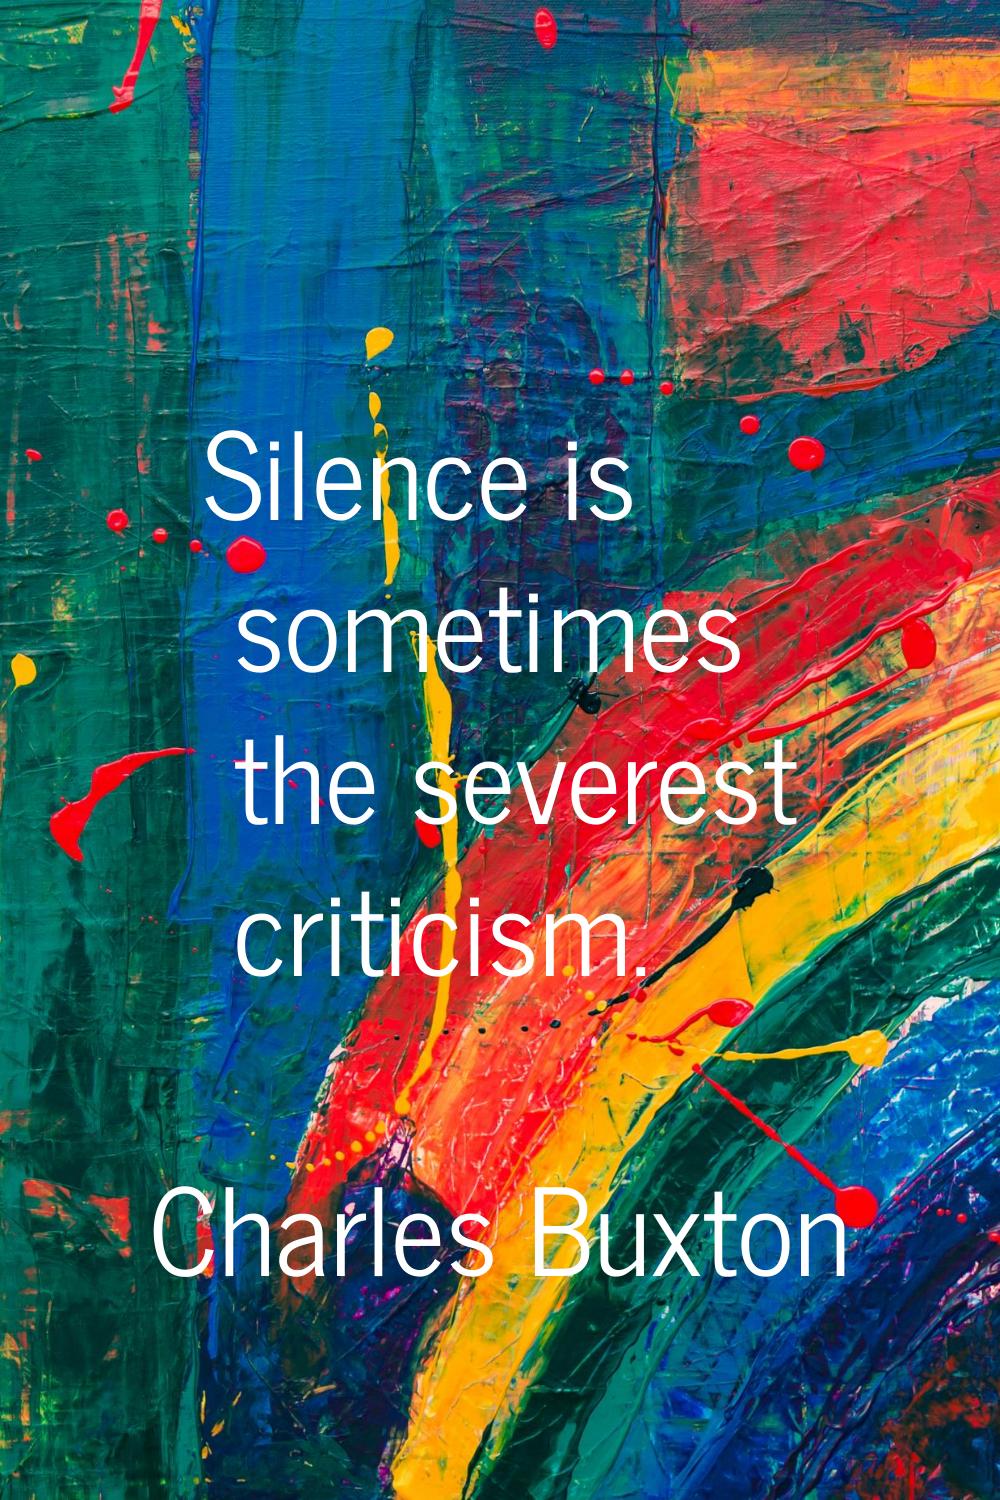 Silence is sometimes the severest criticism.